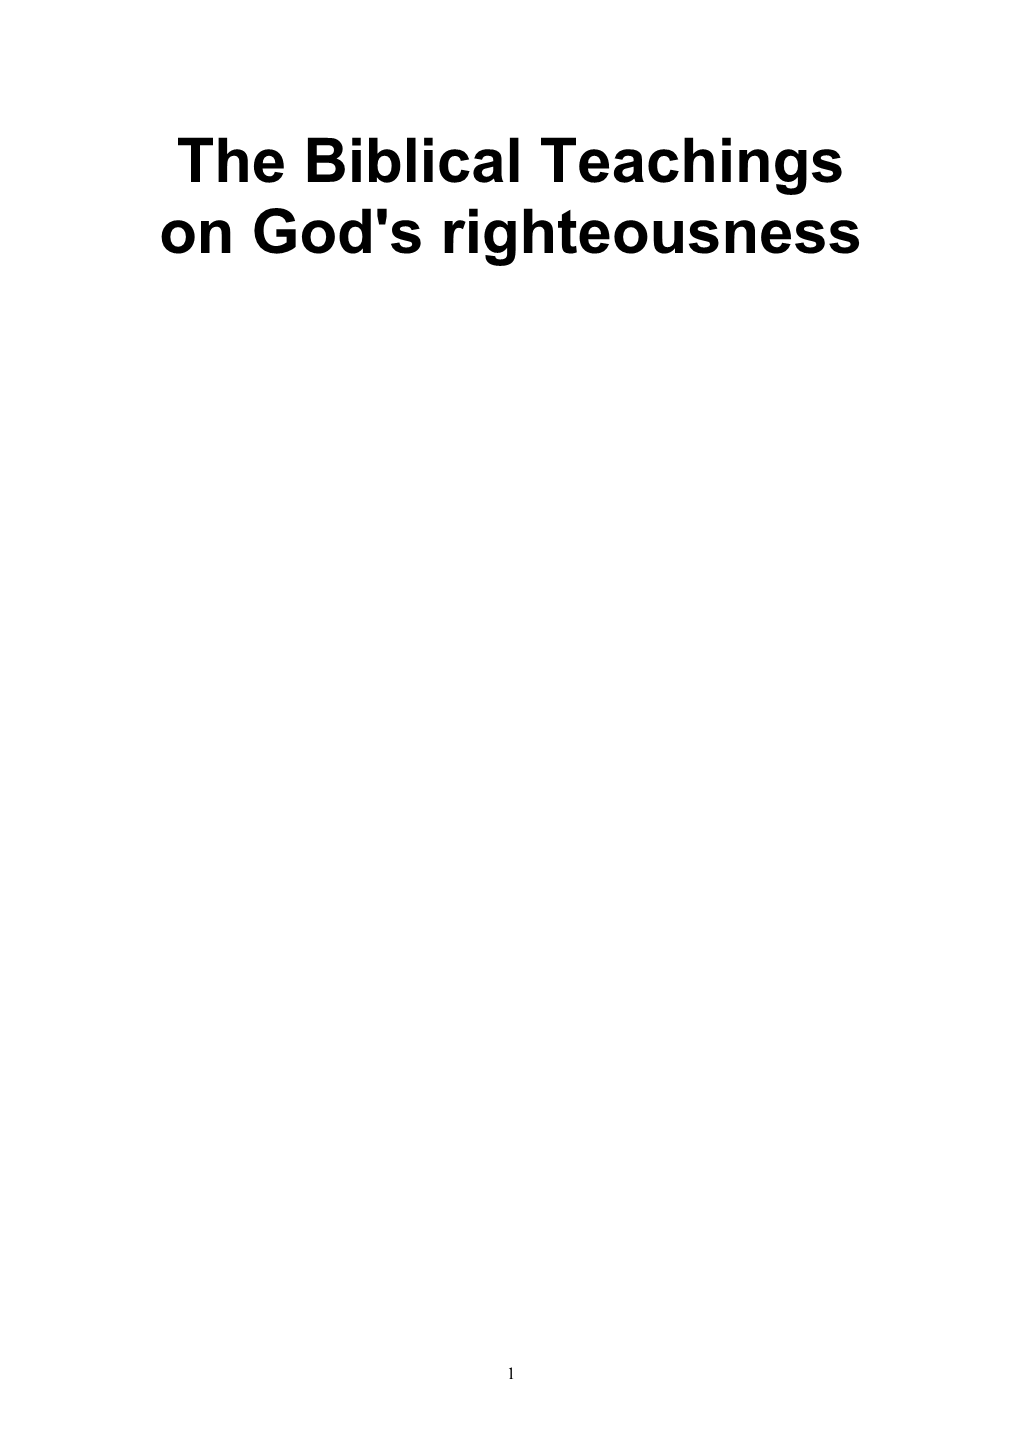 The Biblical Teachings on God's Righteousness